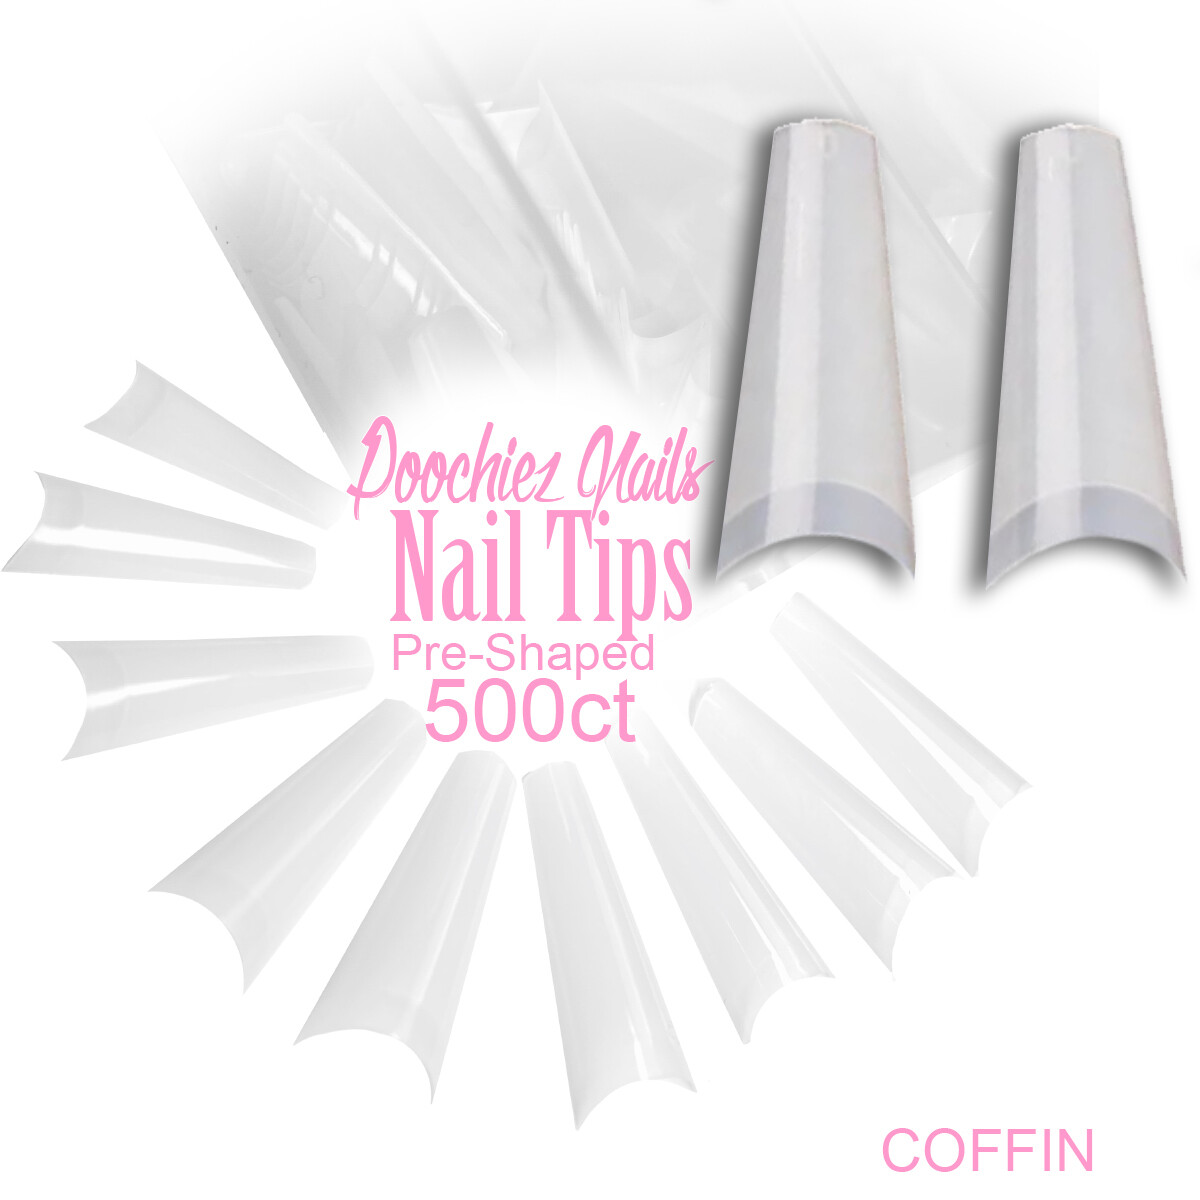 D2 COFFIN NAIL TIPS 500ct + LARGE TIP BOX SIZES 0-9